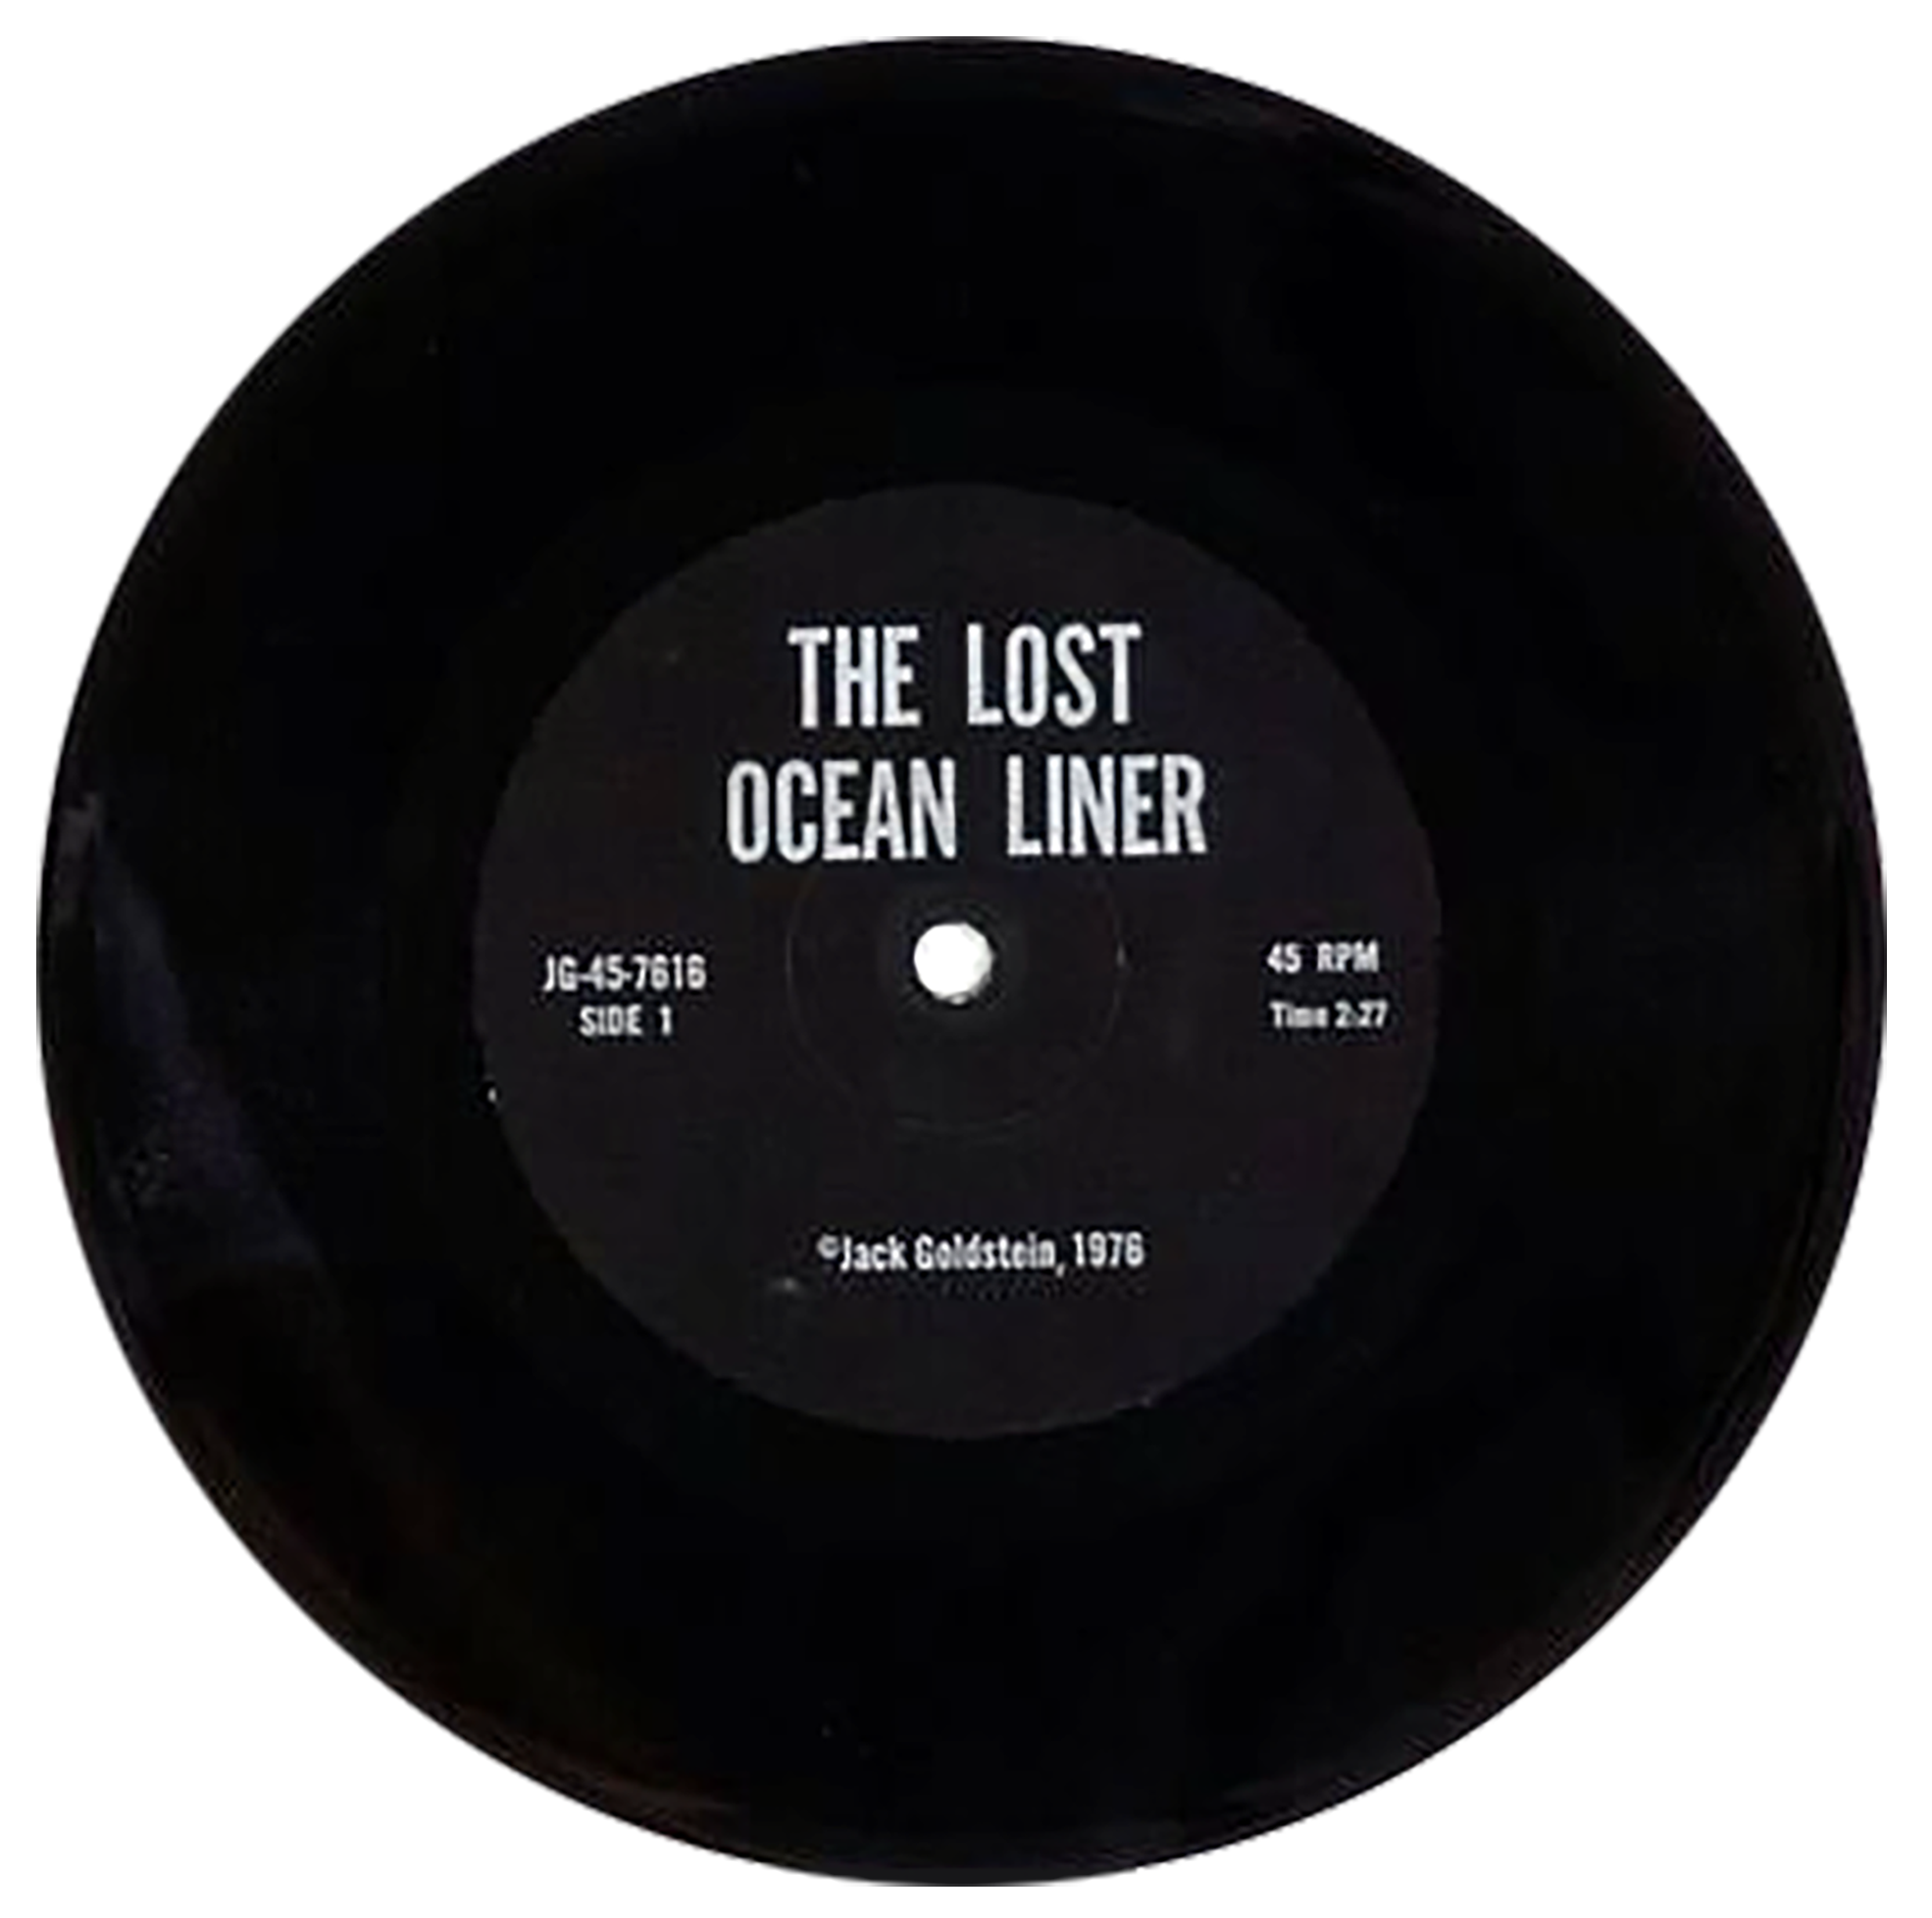  The Lost OCEAN Liner
Black vinyl - 45 rpm 7-inch record

The lost Ocean Liner est un des neuf éléments constitutifs de :
A Suite of Nine 45 rpm 7-Inch Records with Sound Effects
1976